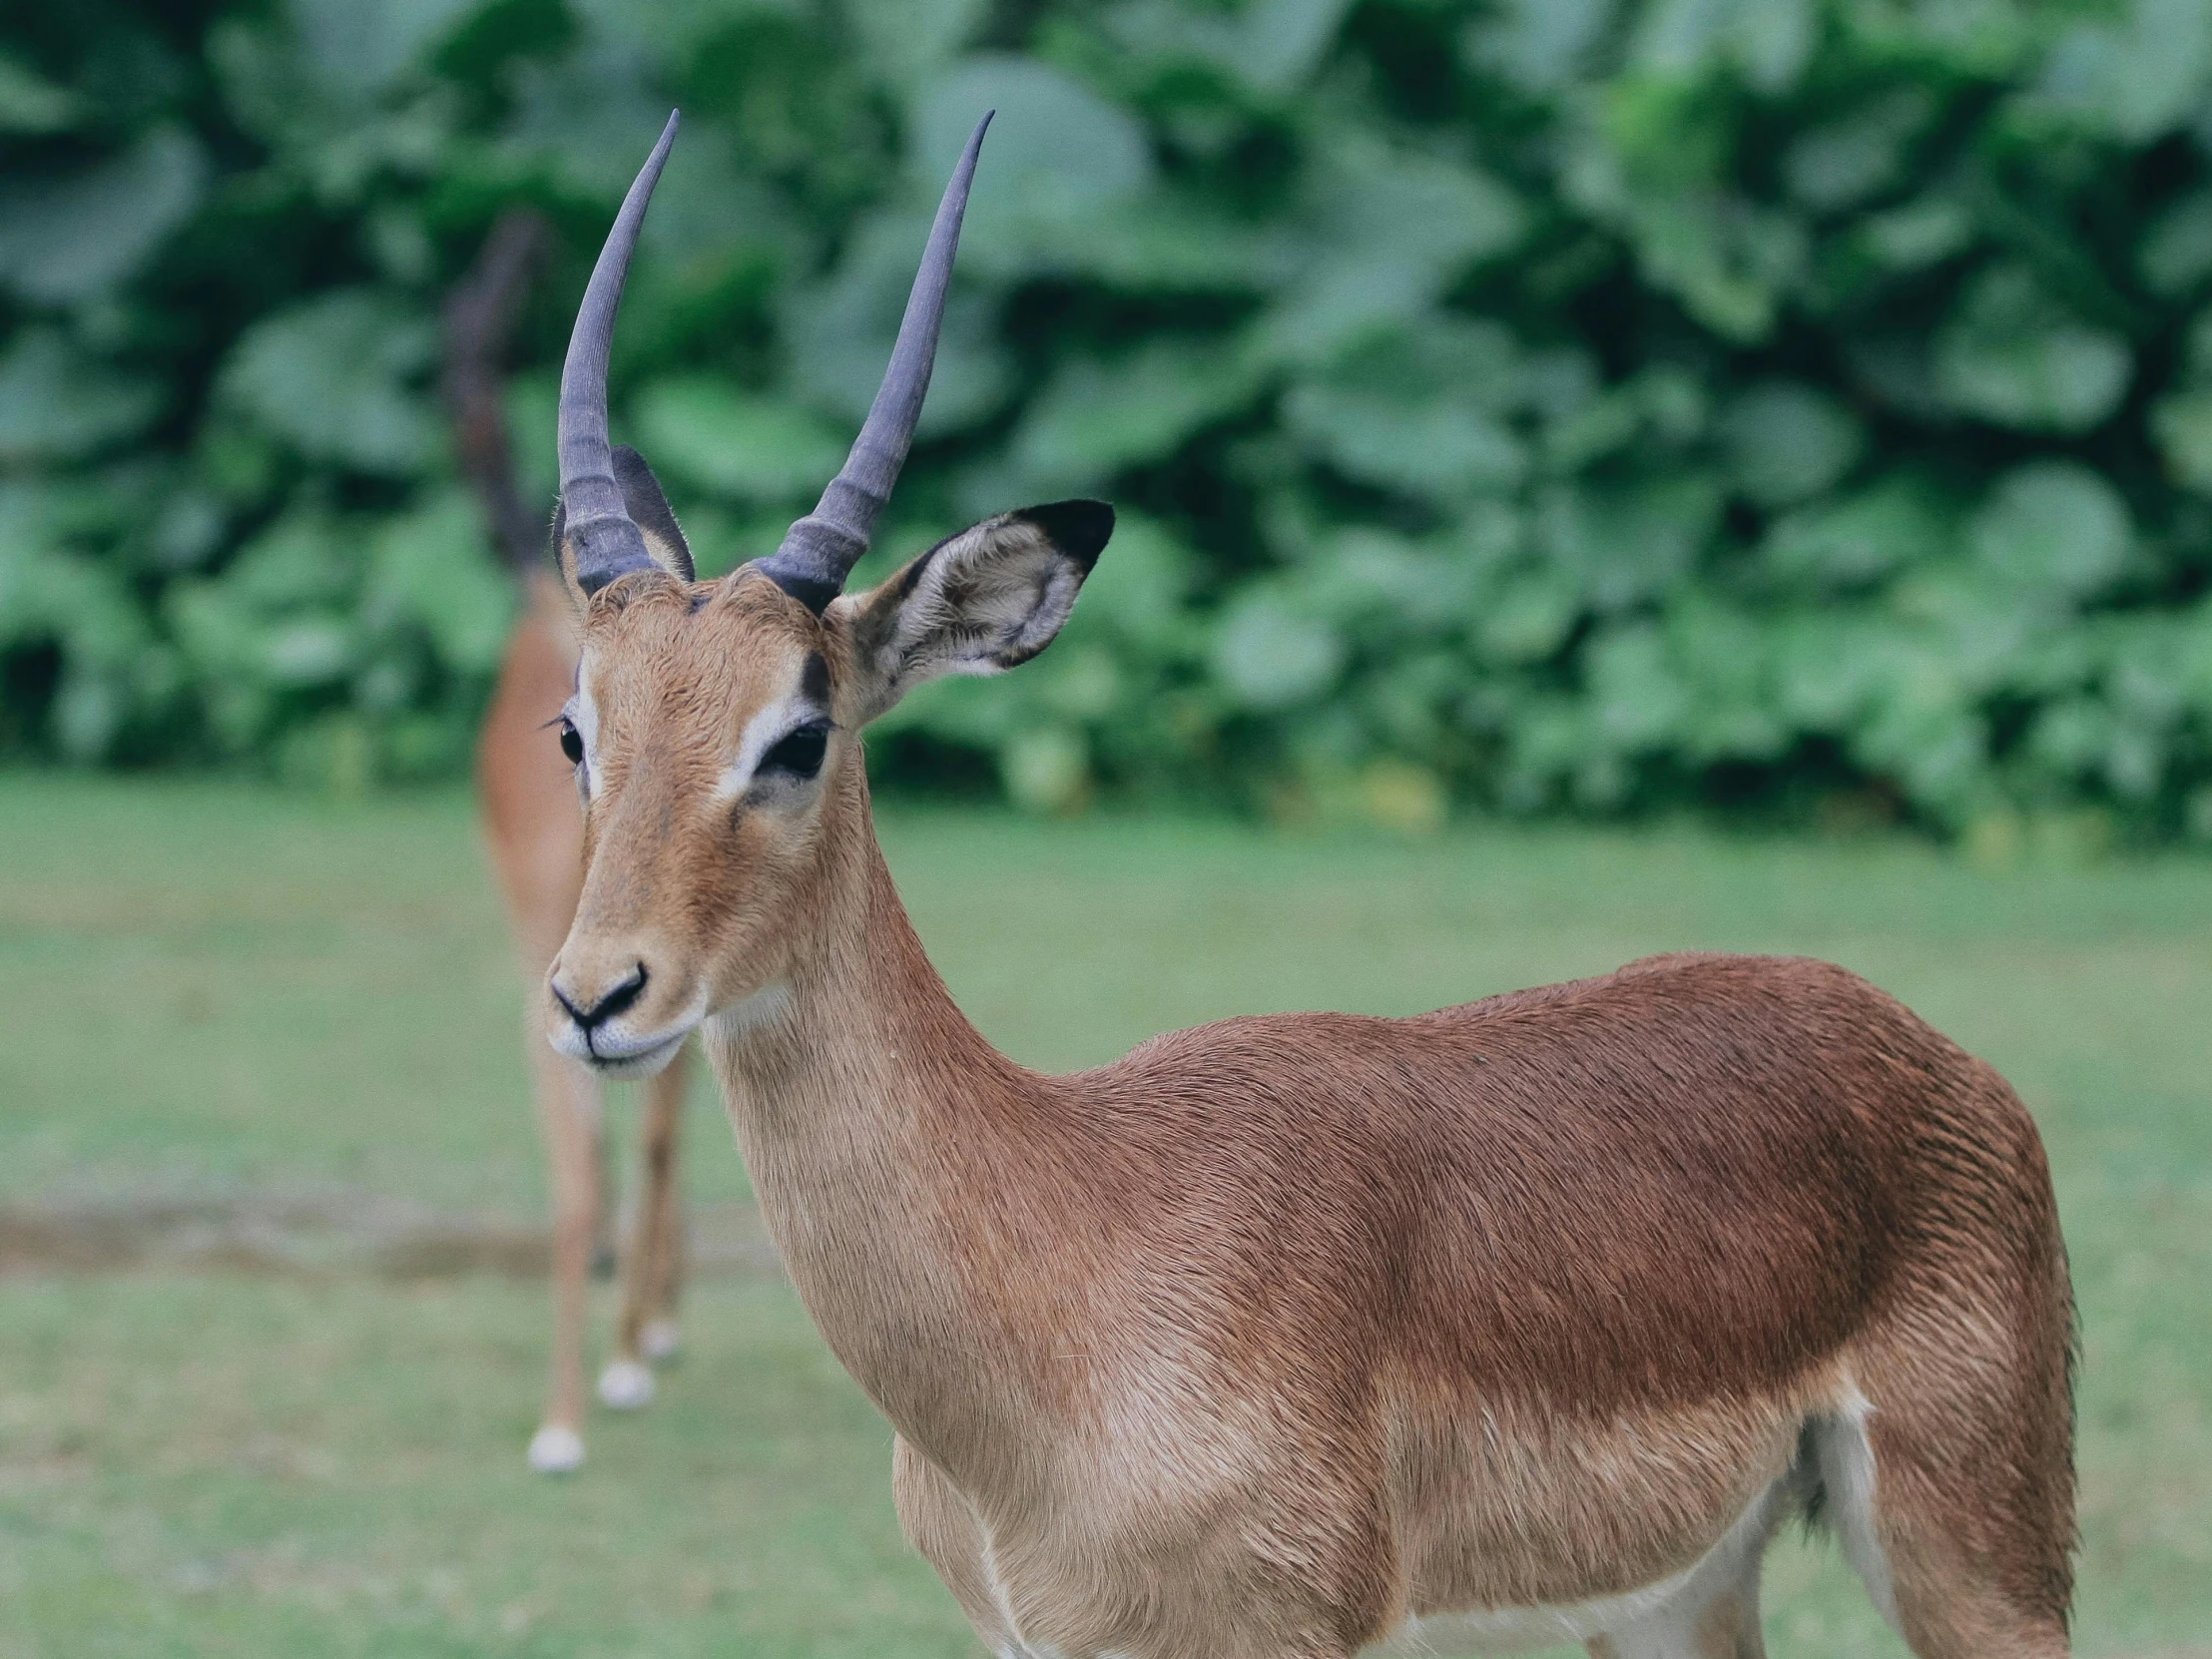 a small gazelle with very long horns stands in the grass